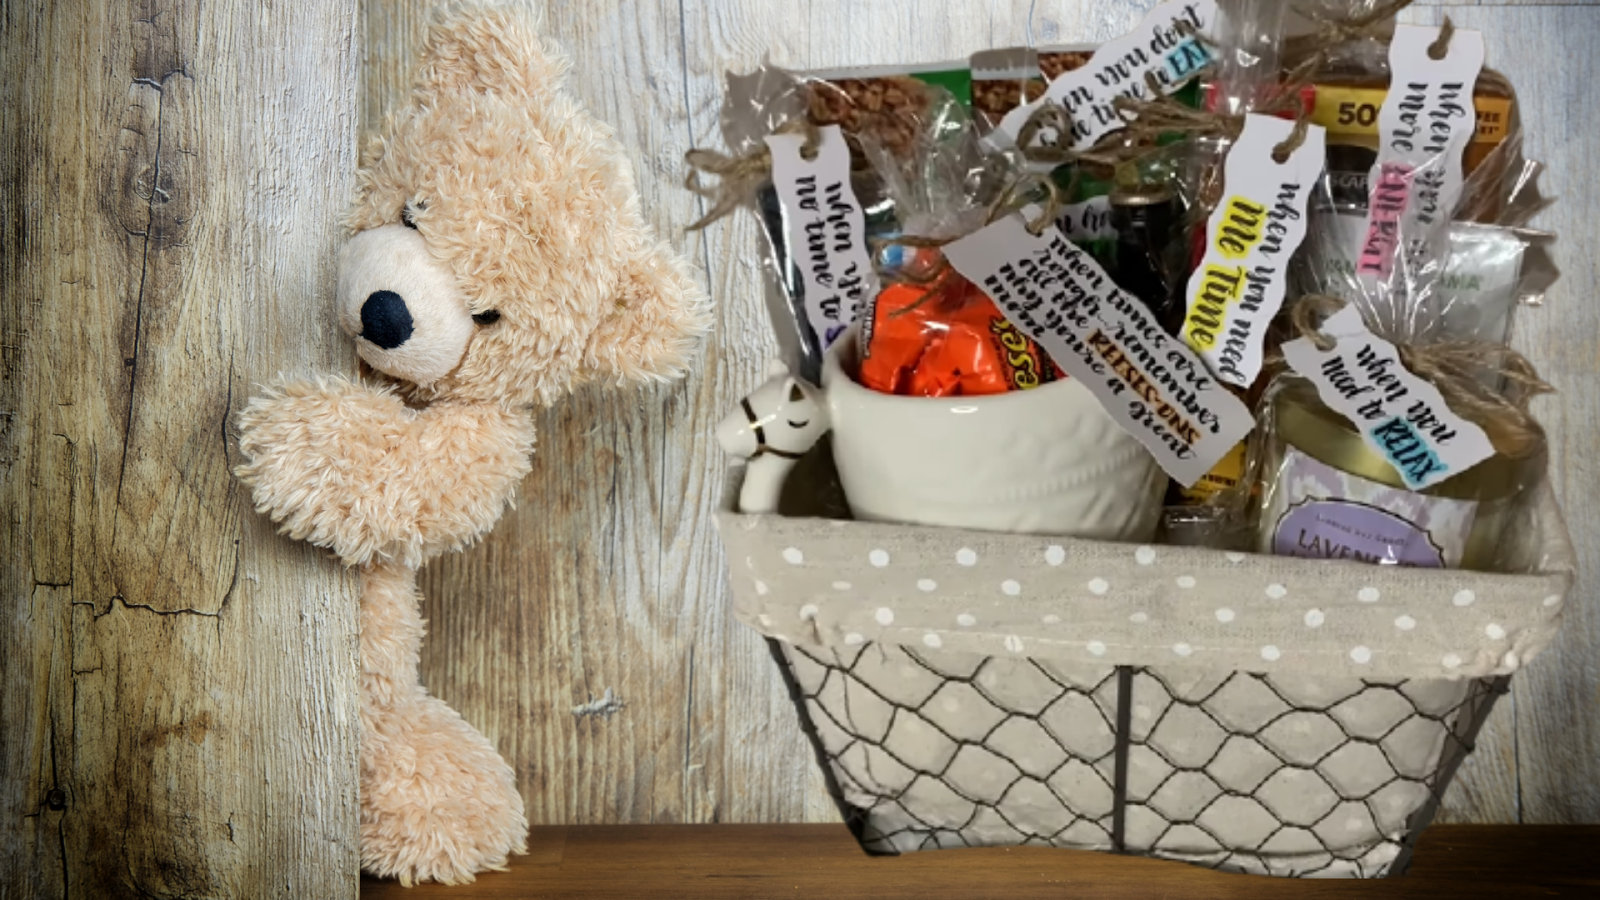 a thoughtful gift basket filled with goodies, treats, and personal care items that every new mom needs to survive a hectic day